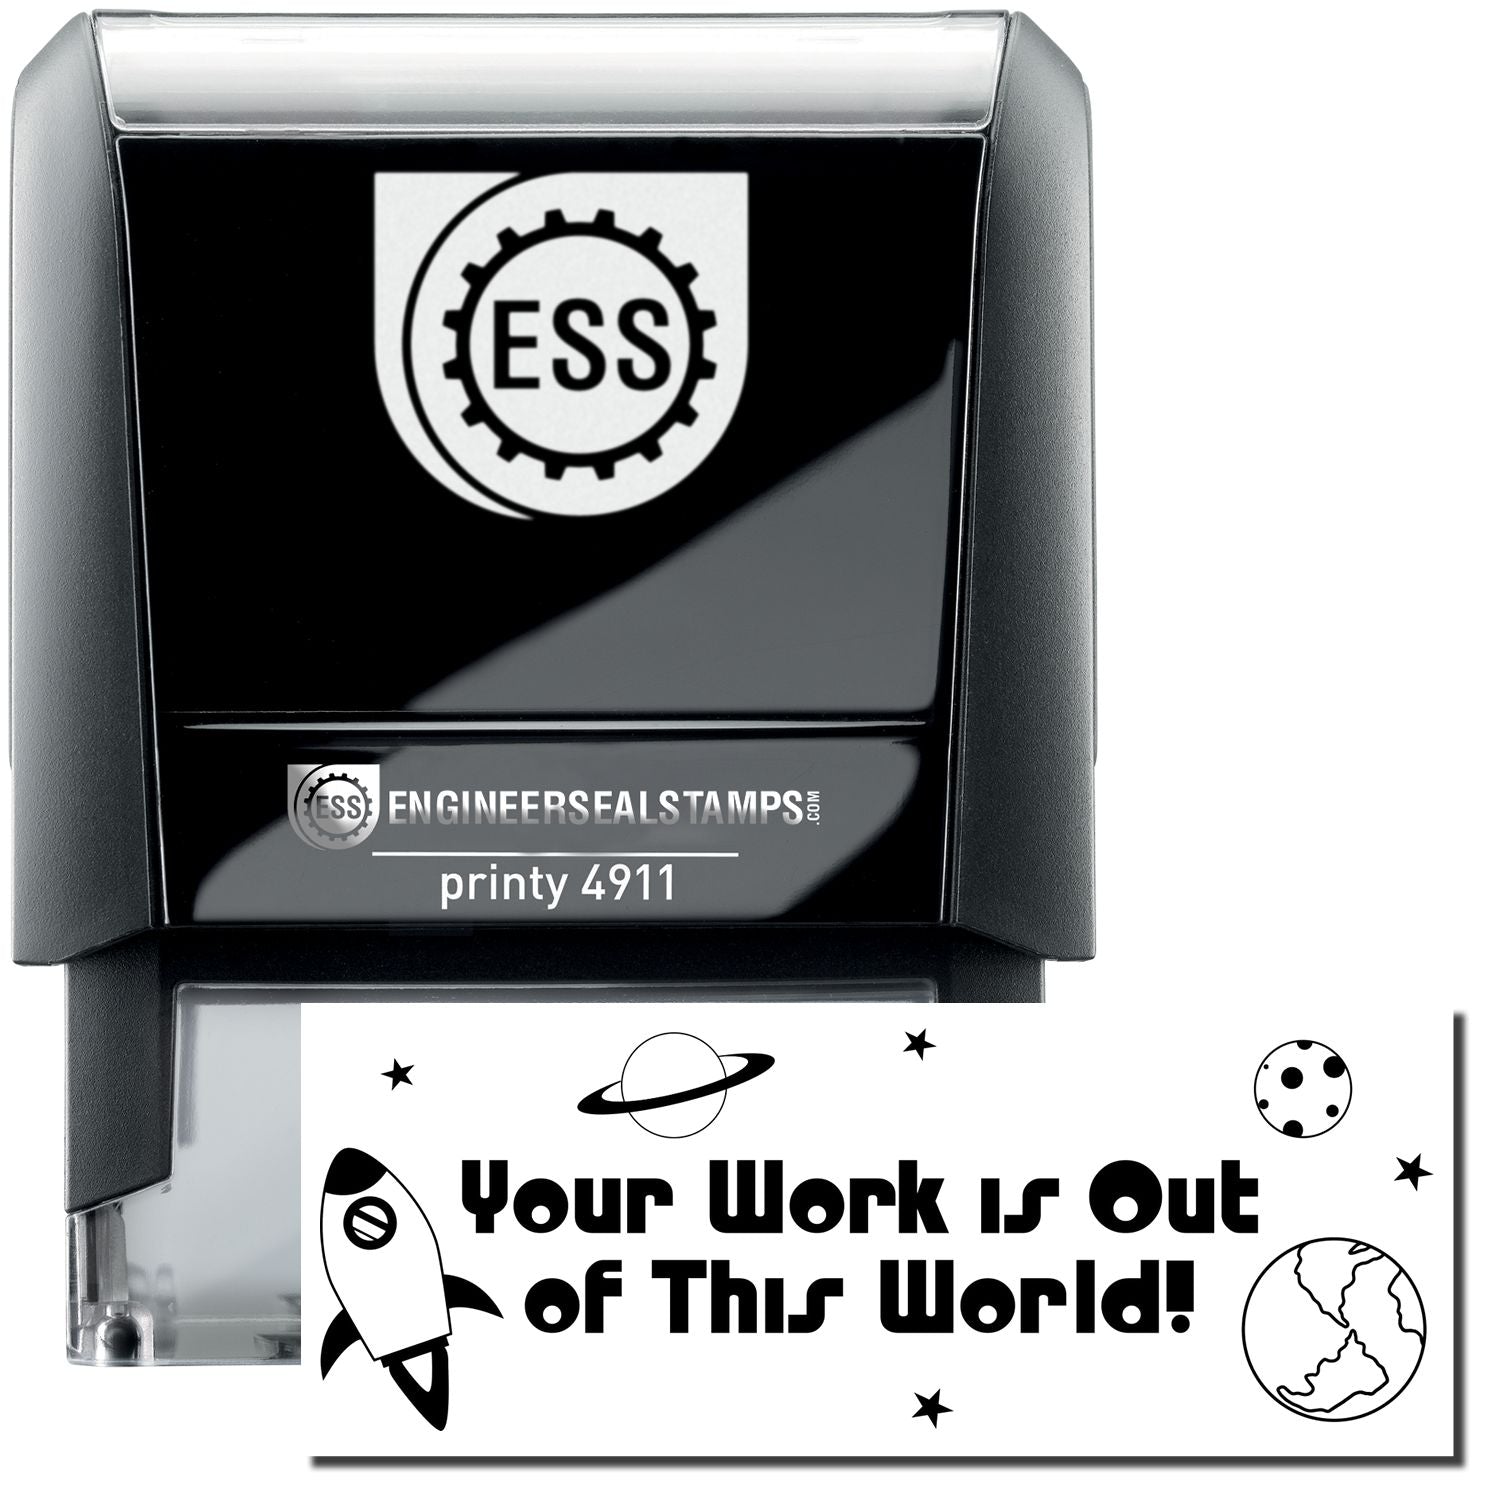 A self-inking stamp with a stamped image showing how the text "Your Work is Out of This World!" (in unique and wacky font surrounded by space icons like planets, moons, and a rocket ship) is displayed after stamping.